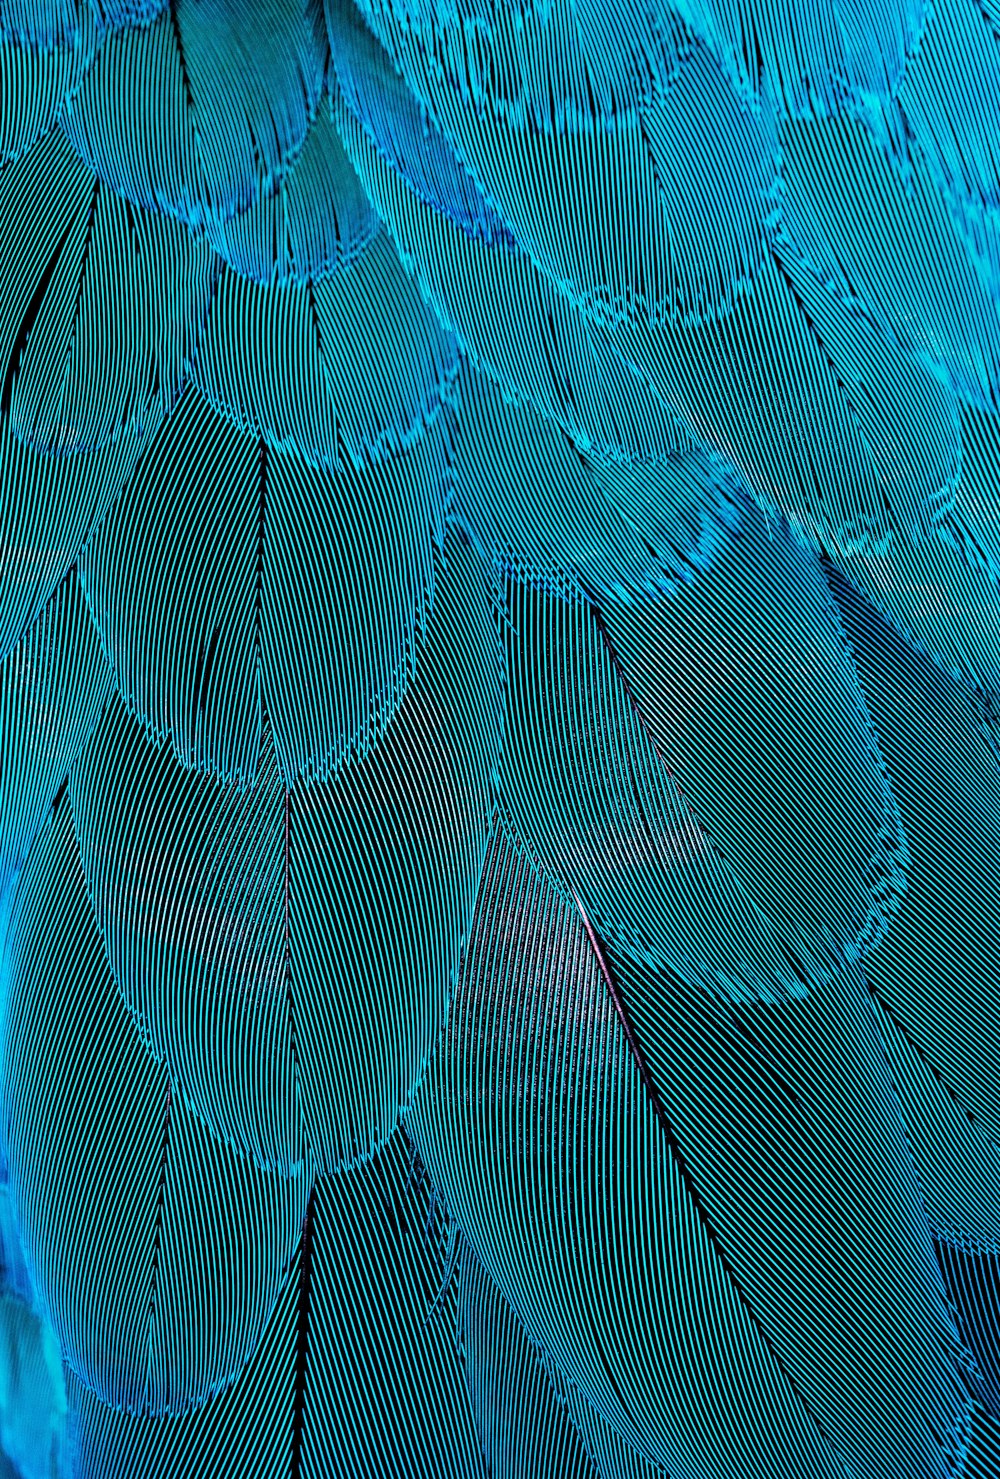 a close up of a blue bird's feathers